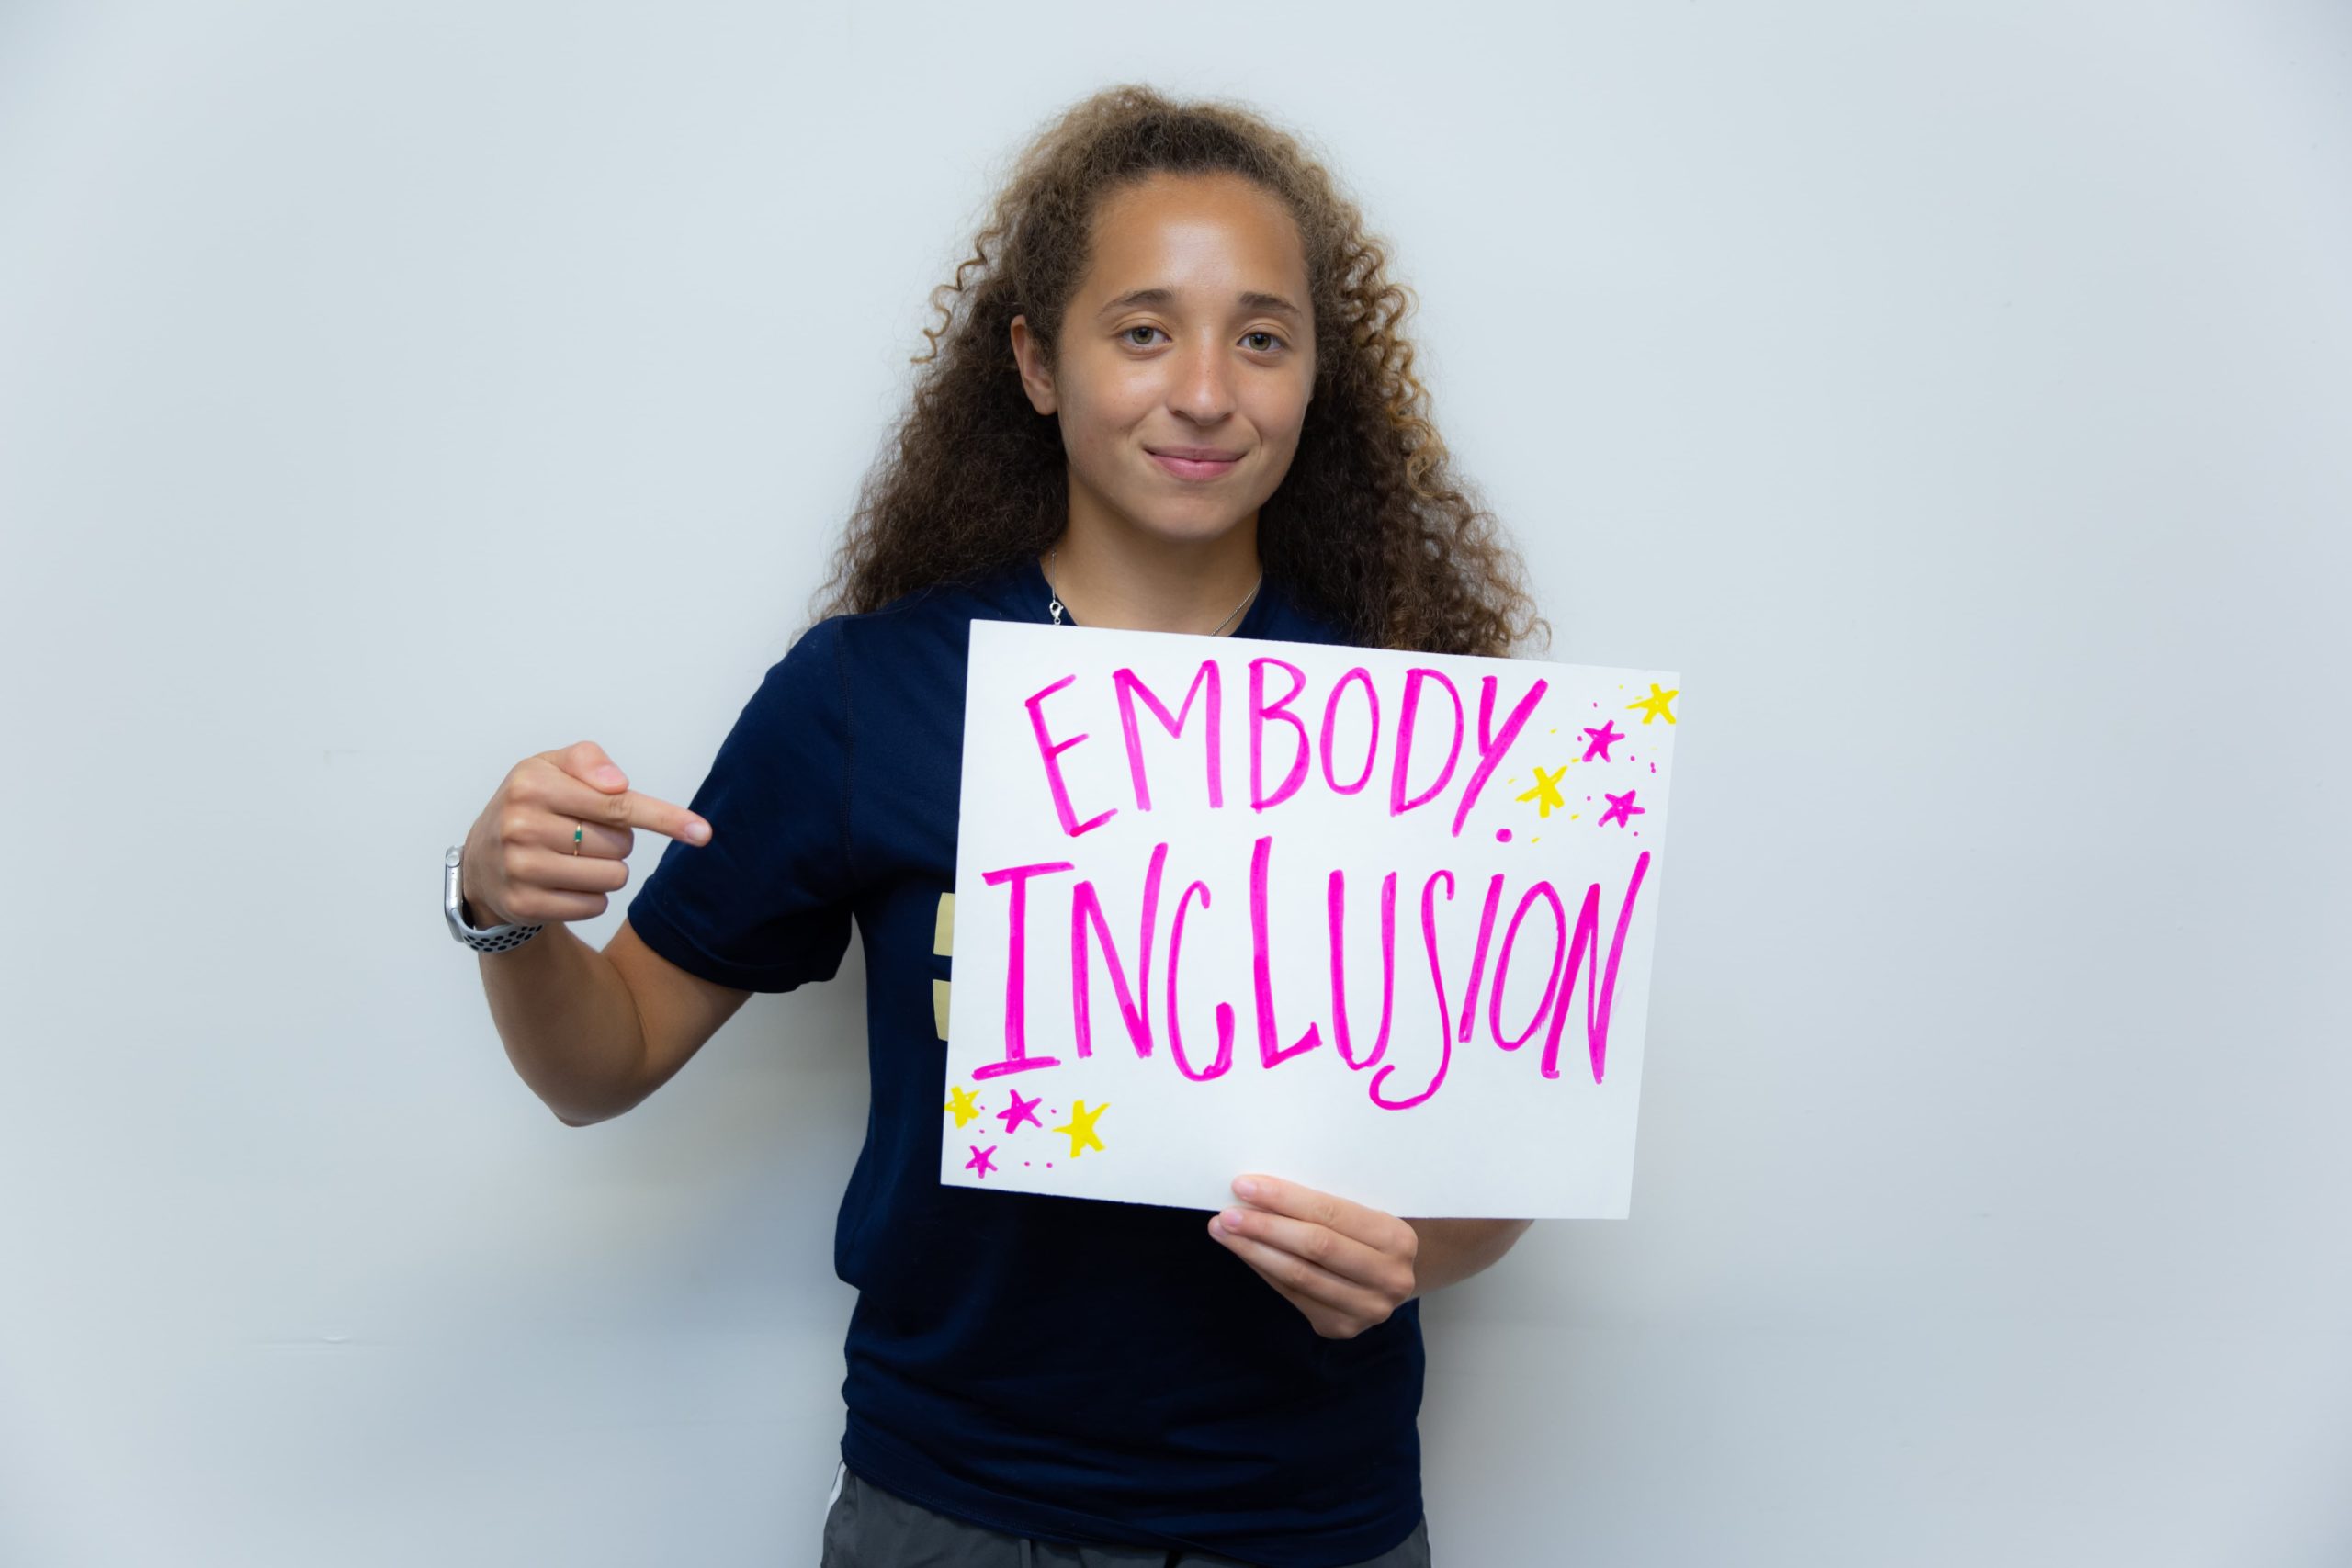 Embody-Inclusion